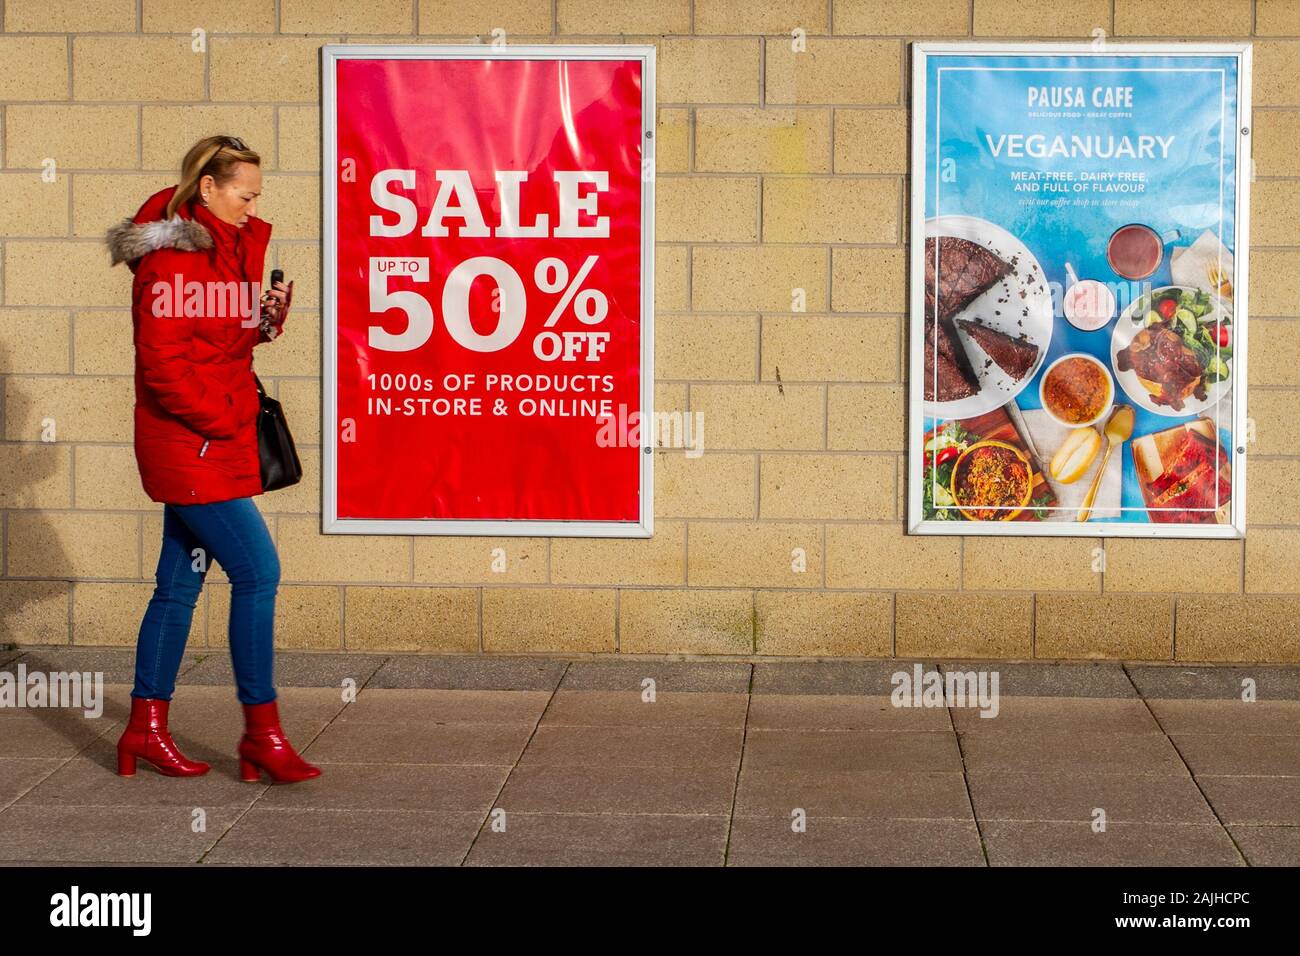 Vegetarianism, vegan, vegetarian, veganism, vegans diet foods; Seafront Retail Park in Southport, UK. January sales under way as shoppers search for bargains. Vegan poster advertises Vegan meals in the Dunelm Pausa cafe. Stock Photo